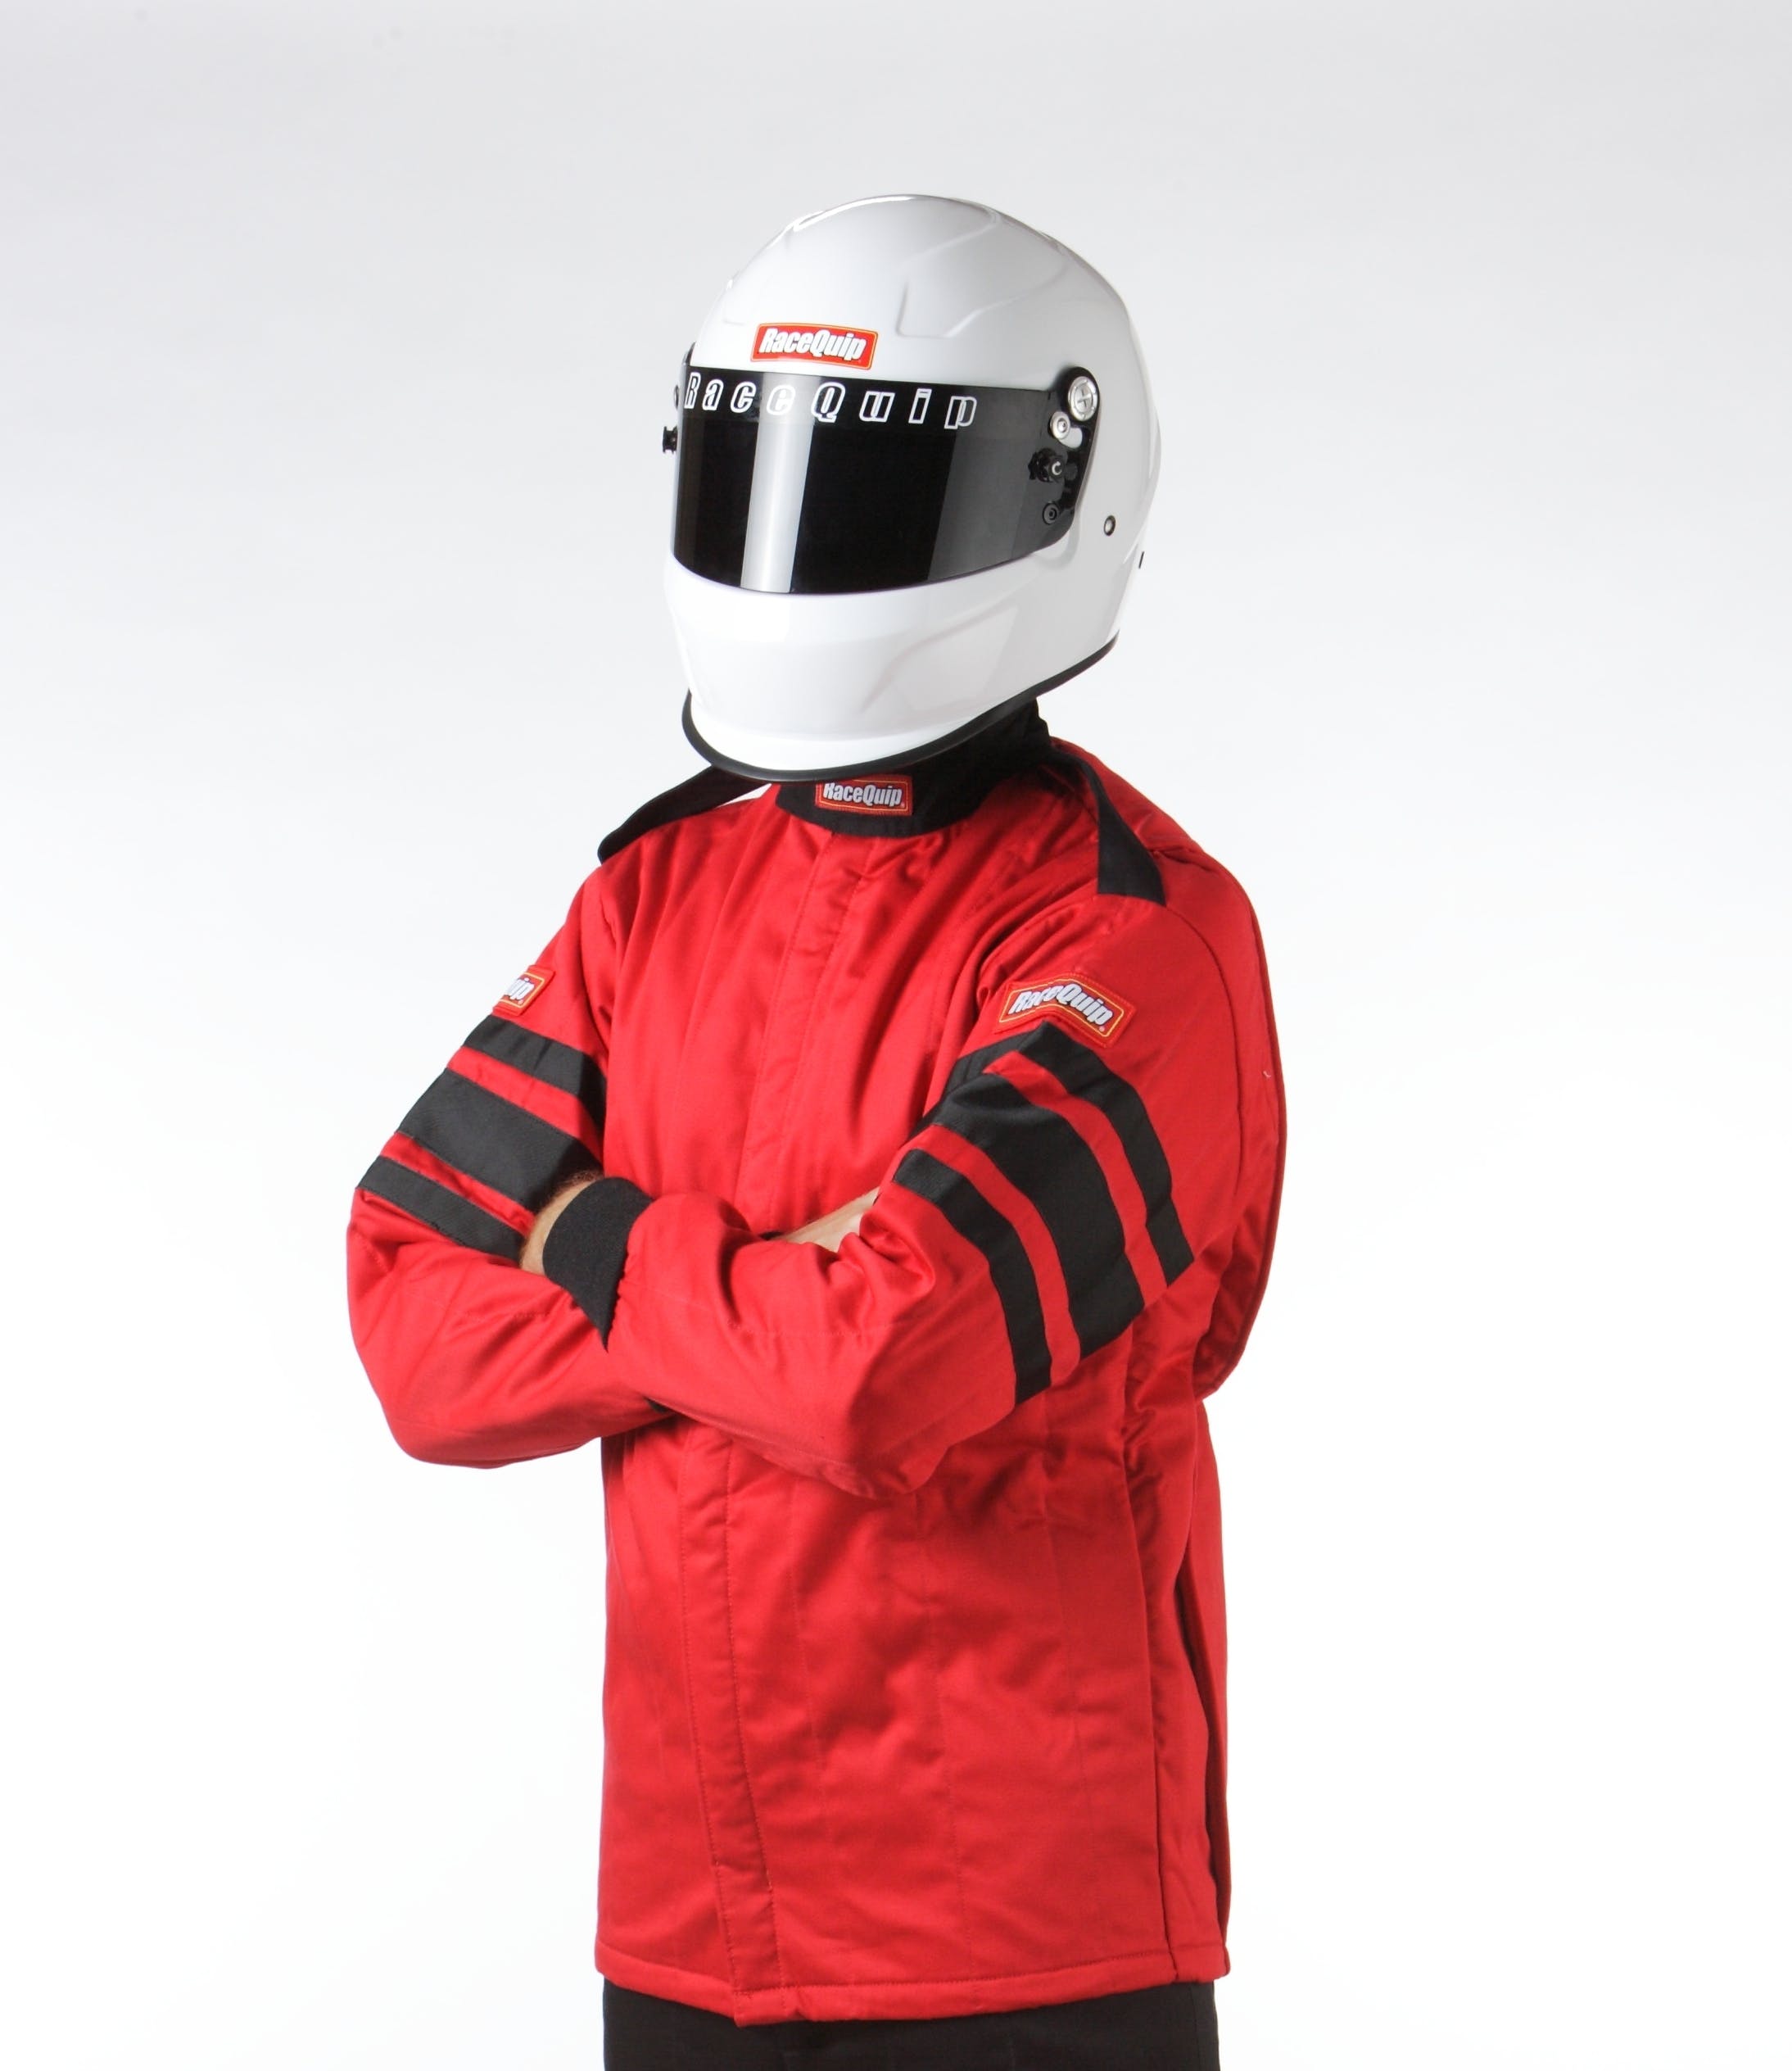 RaceQuip 121017 SFI-5 Pyrovatex Multi-Layer Racing Fire Jacket (Red, XX-Large)